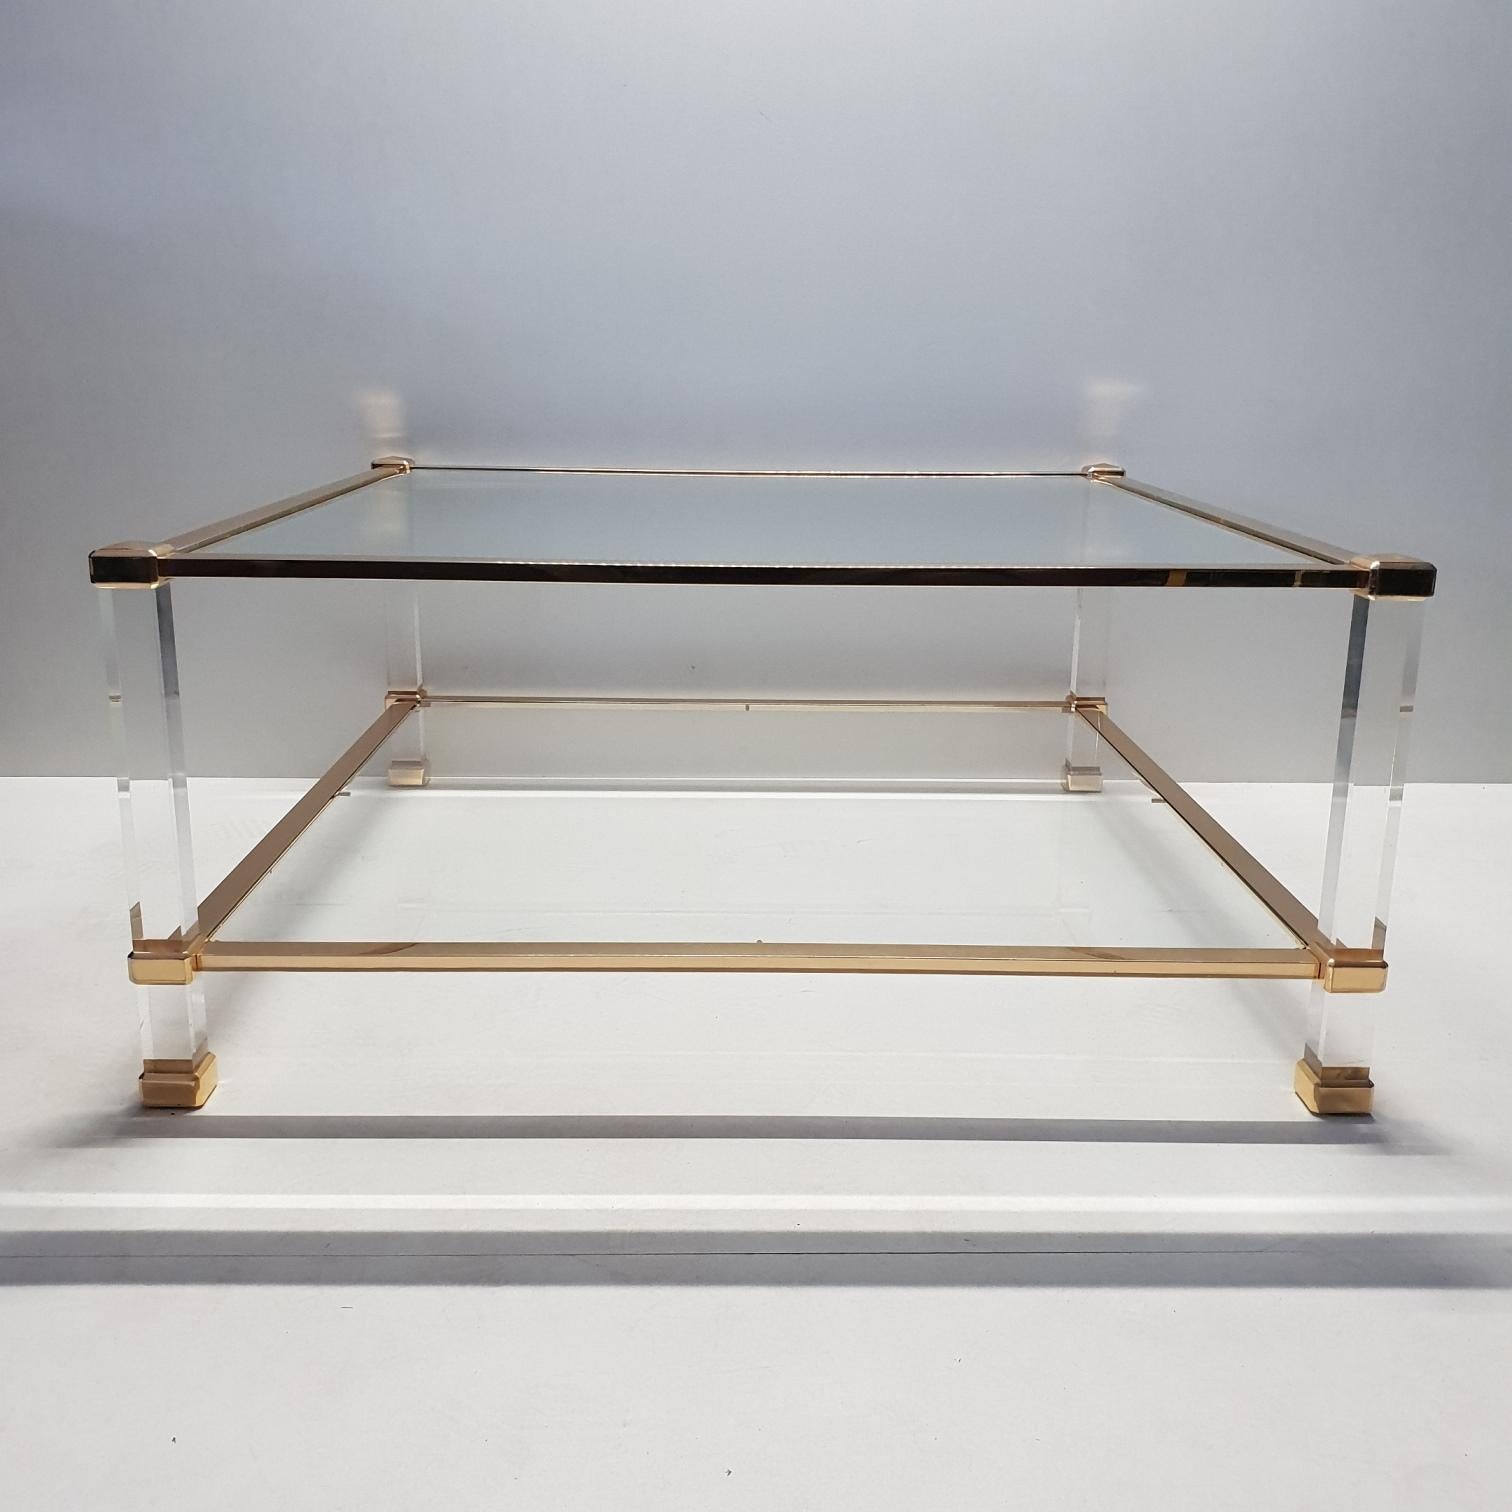 Italian Lucite and brass square coffee table by Orsenigo, 1970s
Unique.

Orsenigo Furniture History - The company was founded in 1960 in Italy by the Orsenigo family, and continues to operate today north of Milan. The high end furniture combines